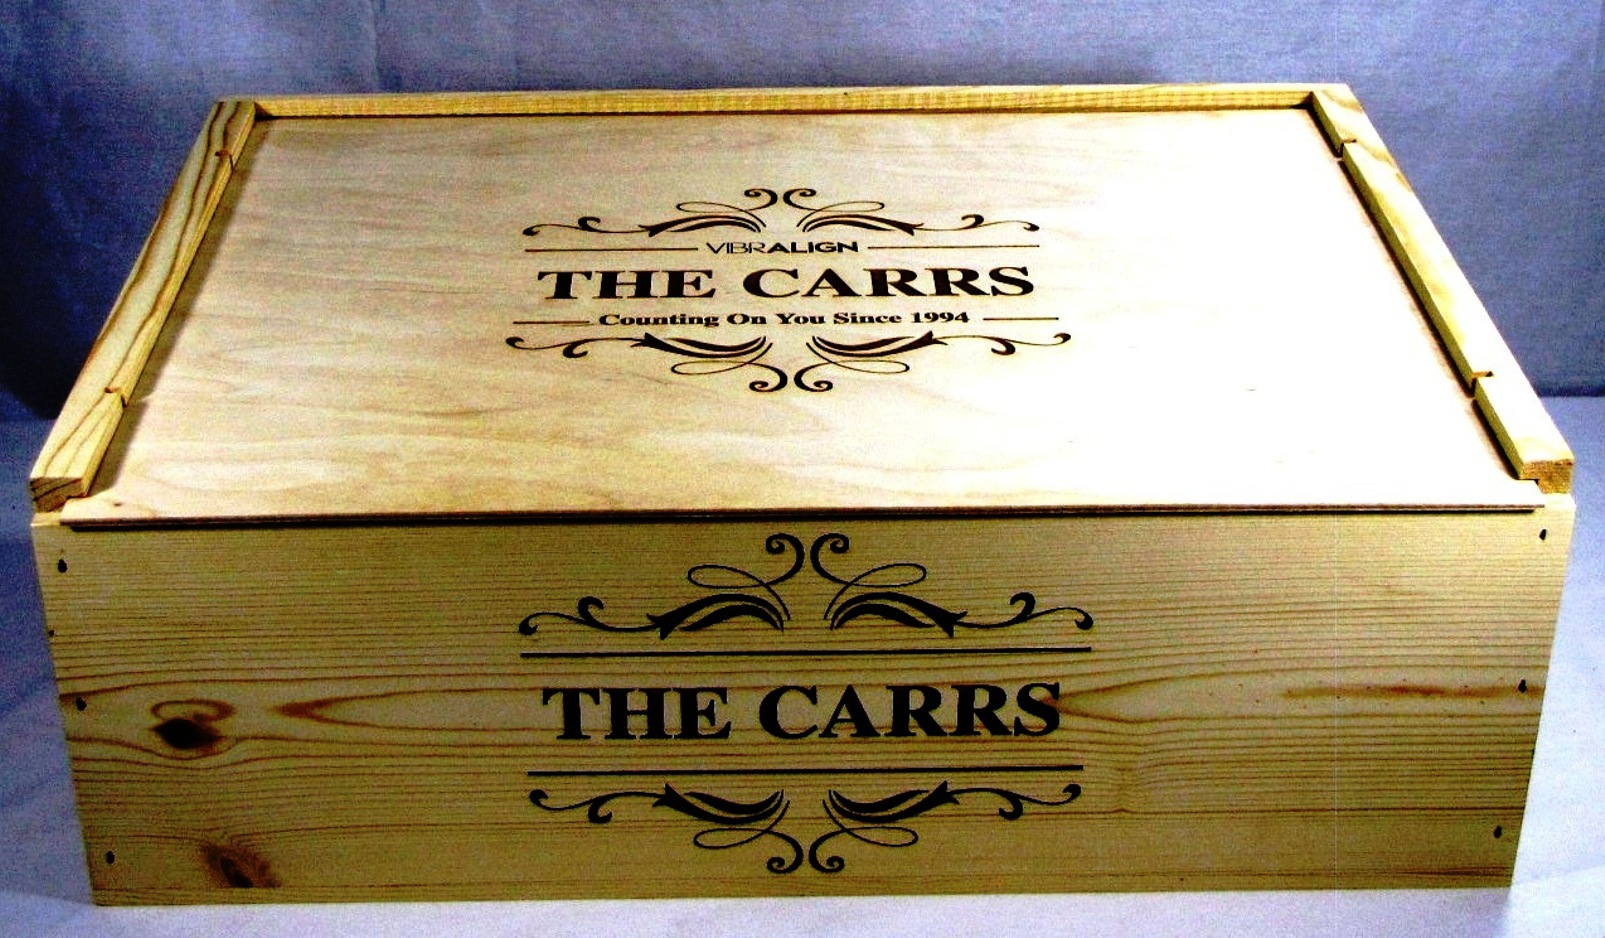 The Carrs Brand Printed on a Wooden Box